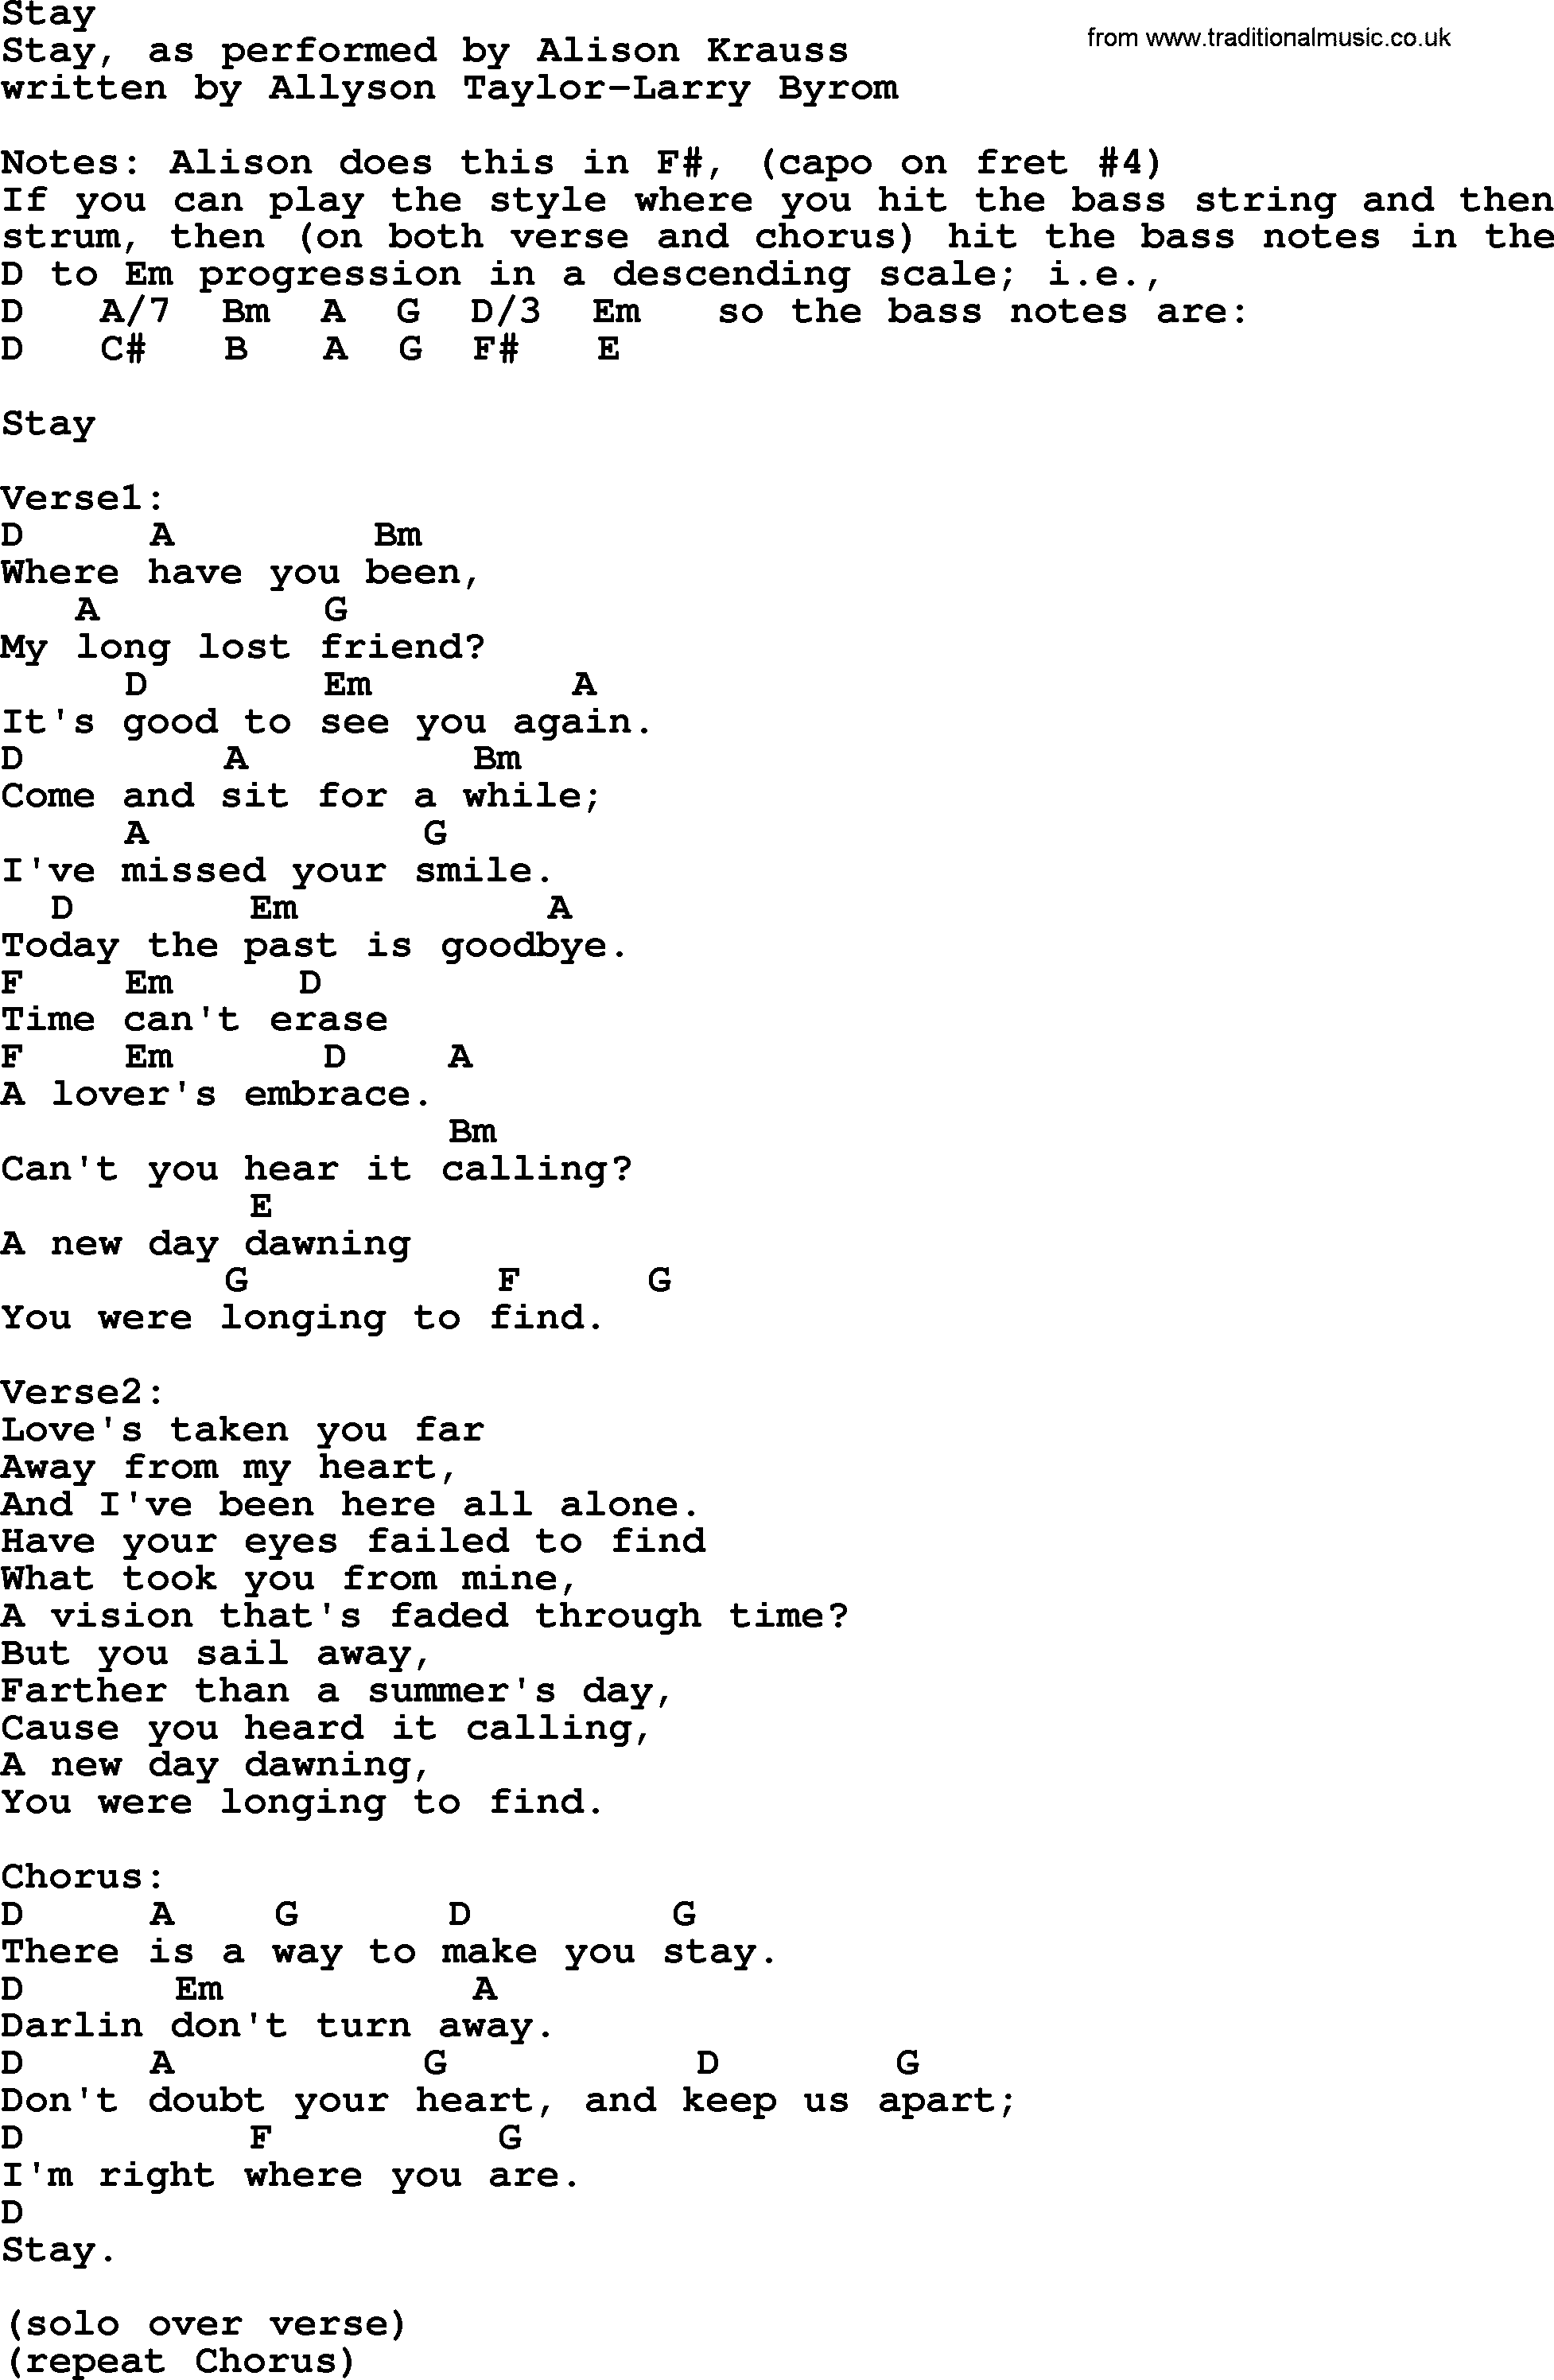 Bluegrass song: Stay, lyrics and chords